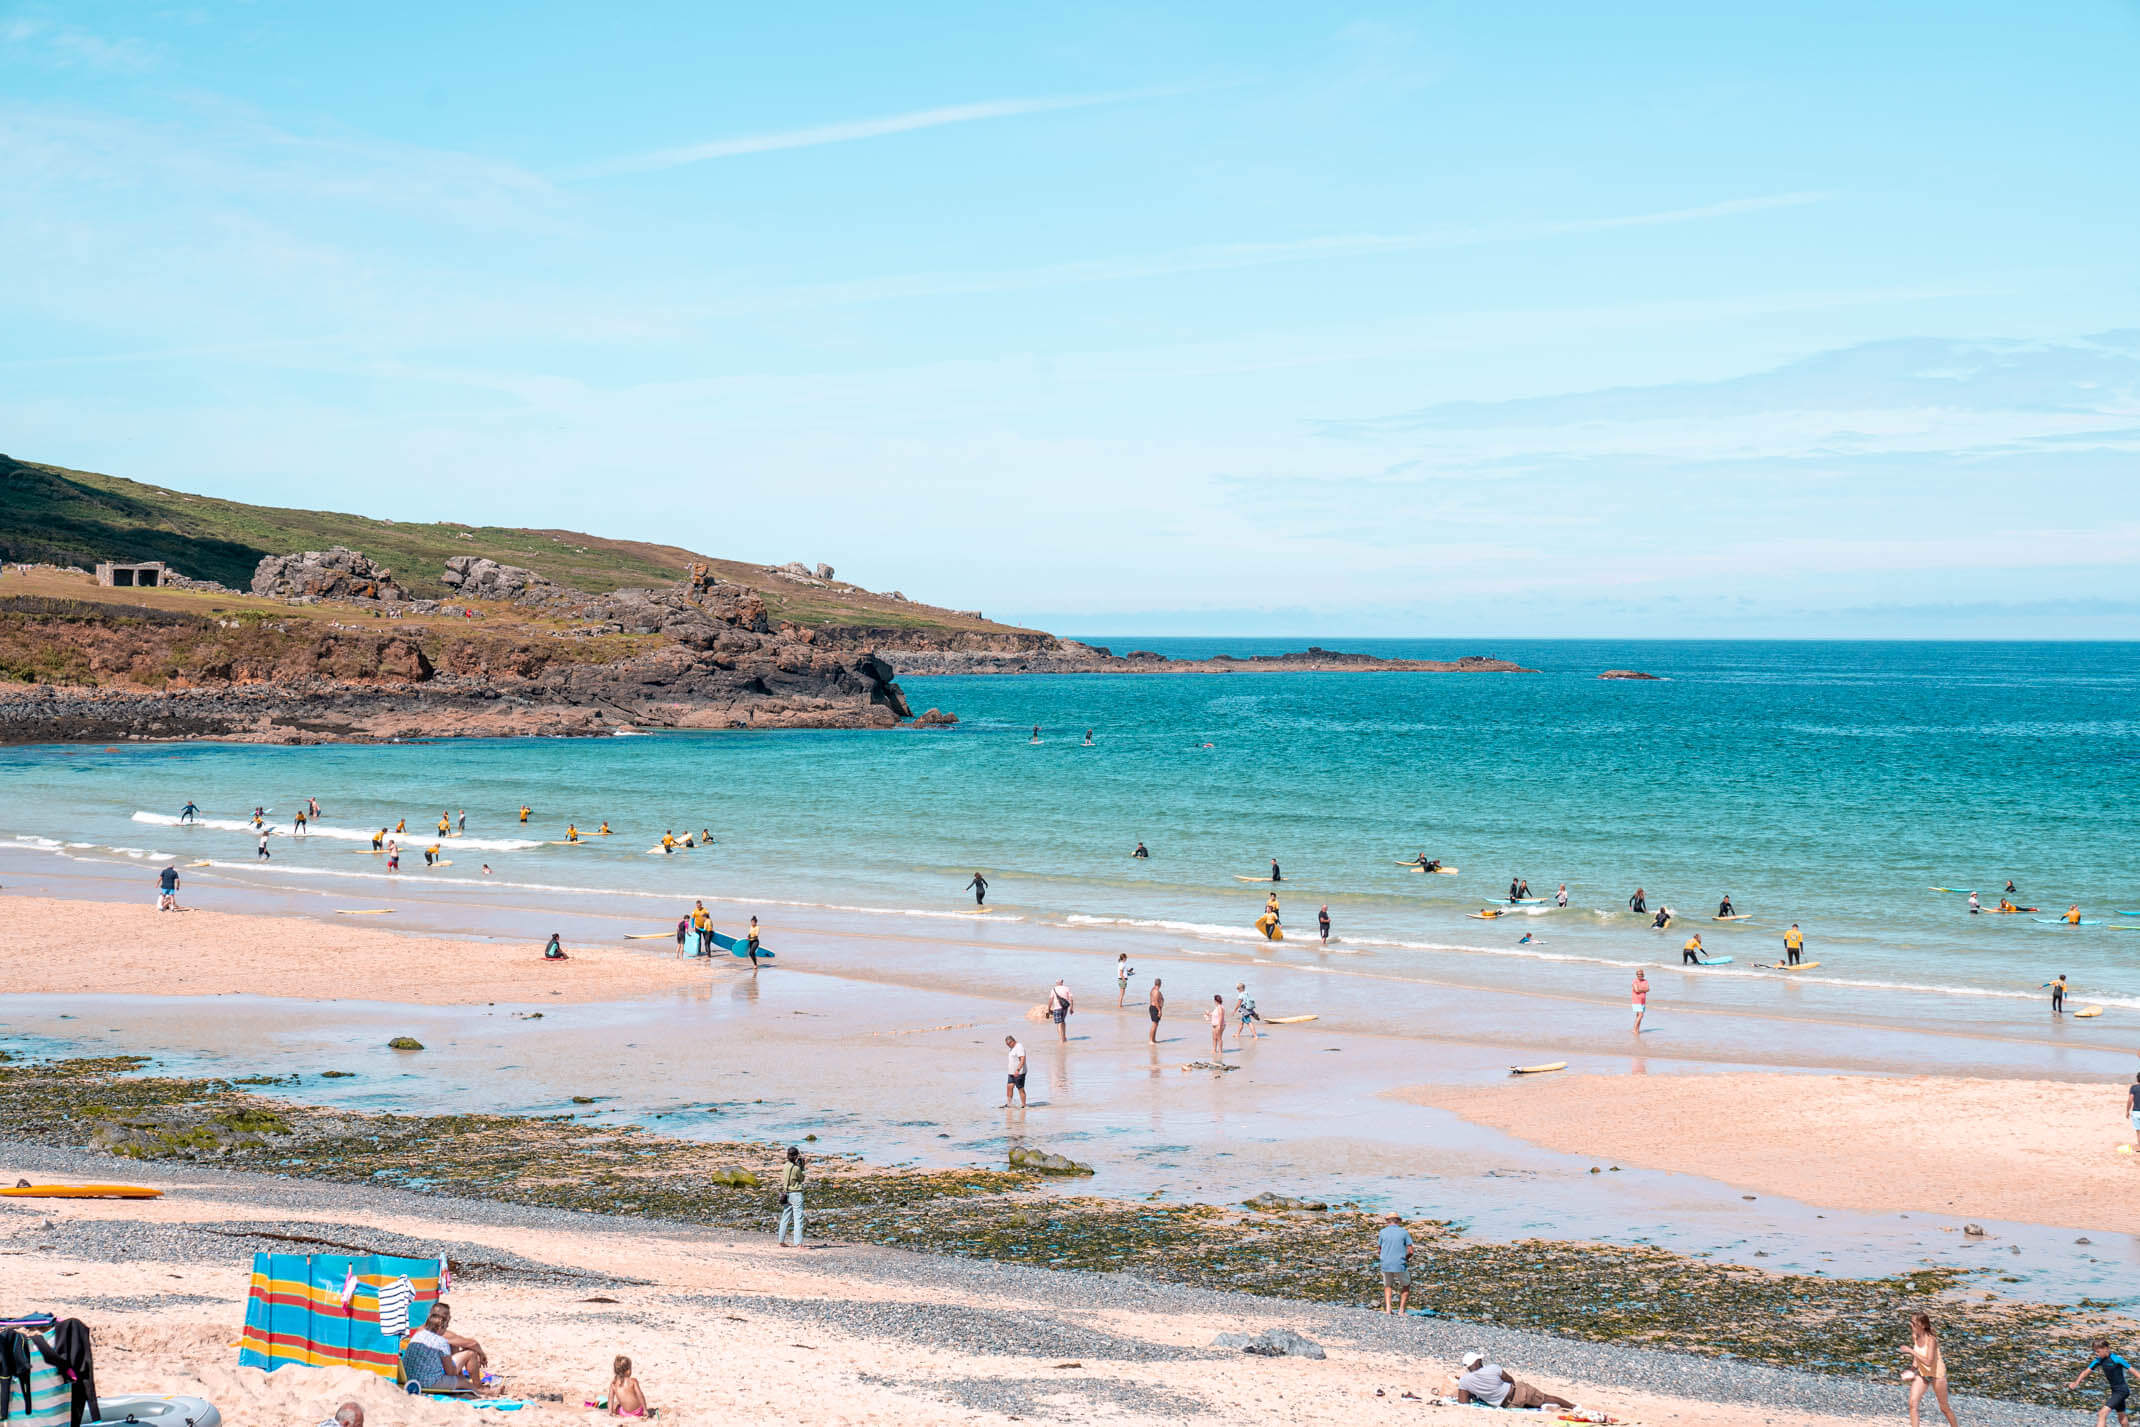 Porthmeor Beach, St.Ives: A guide to the most beautiful beaches in Cornwall, England